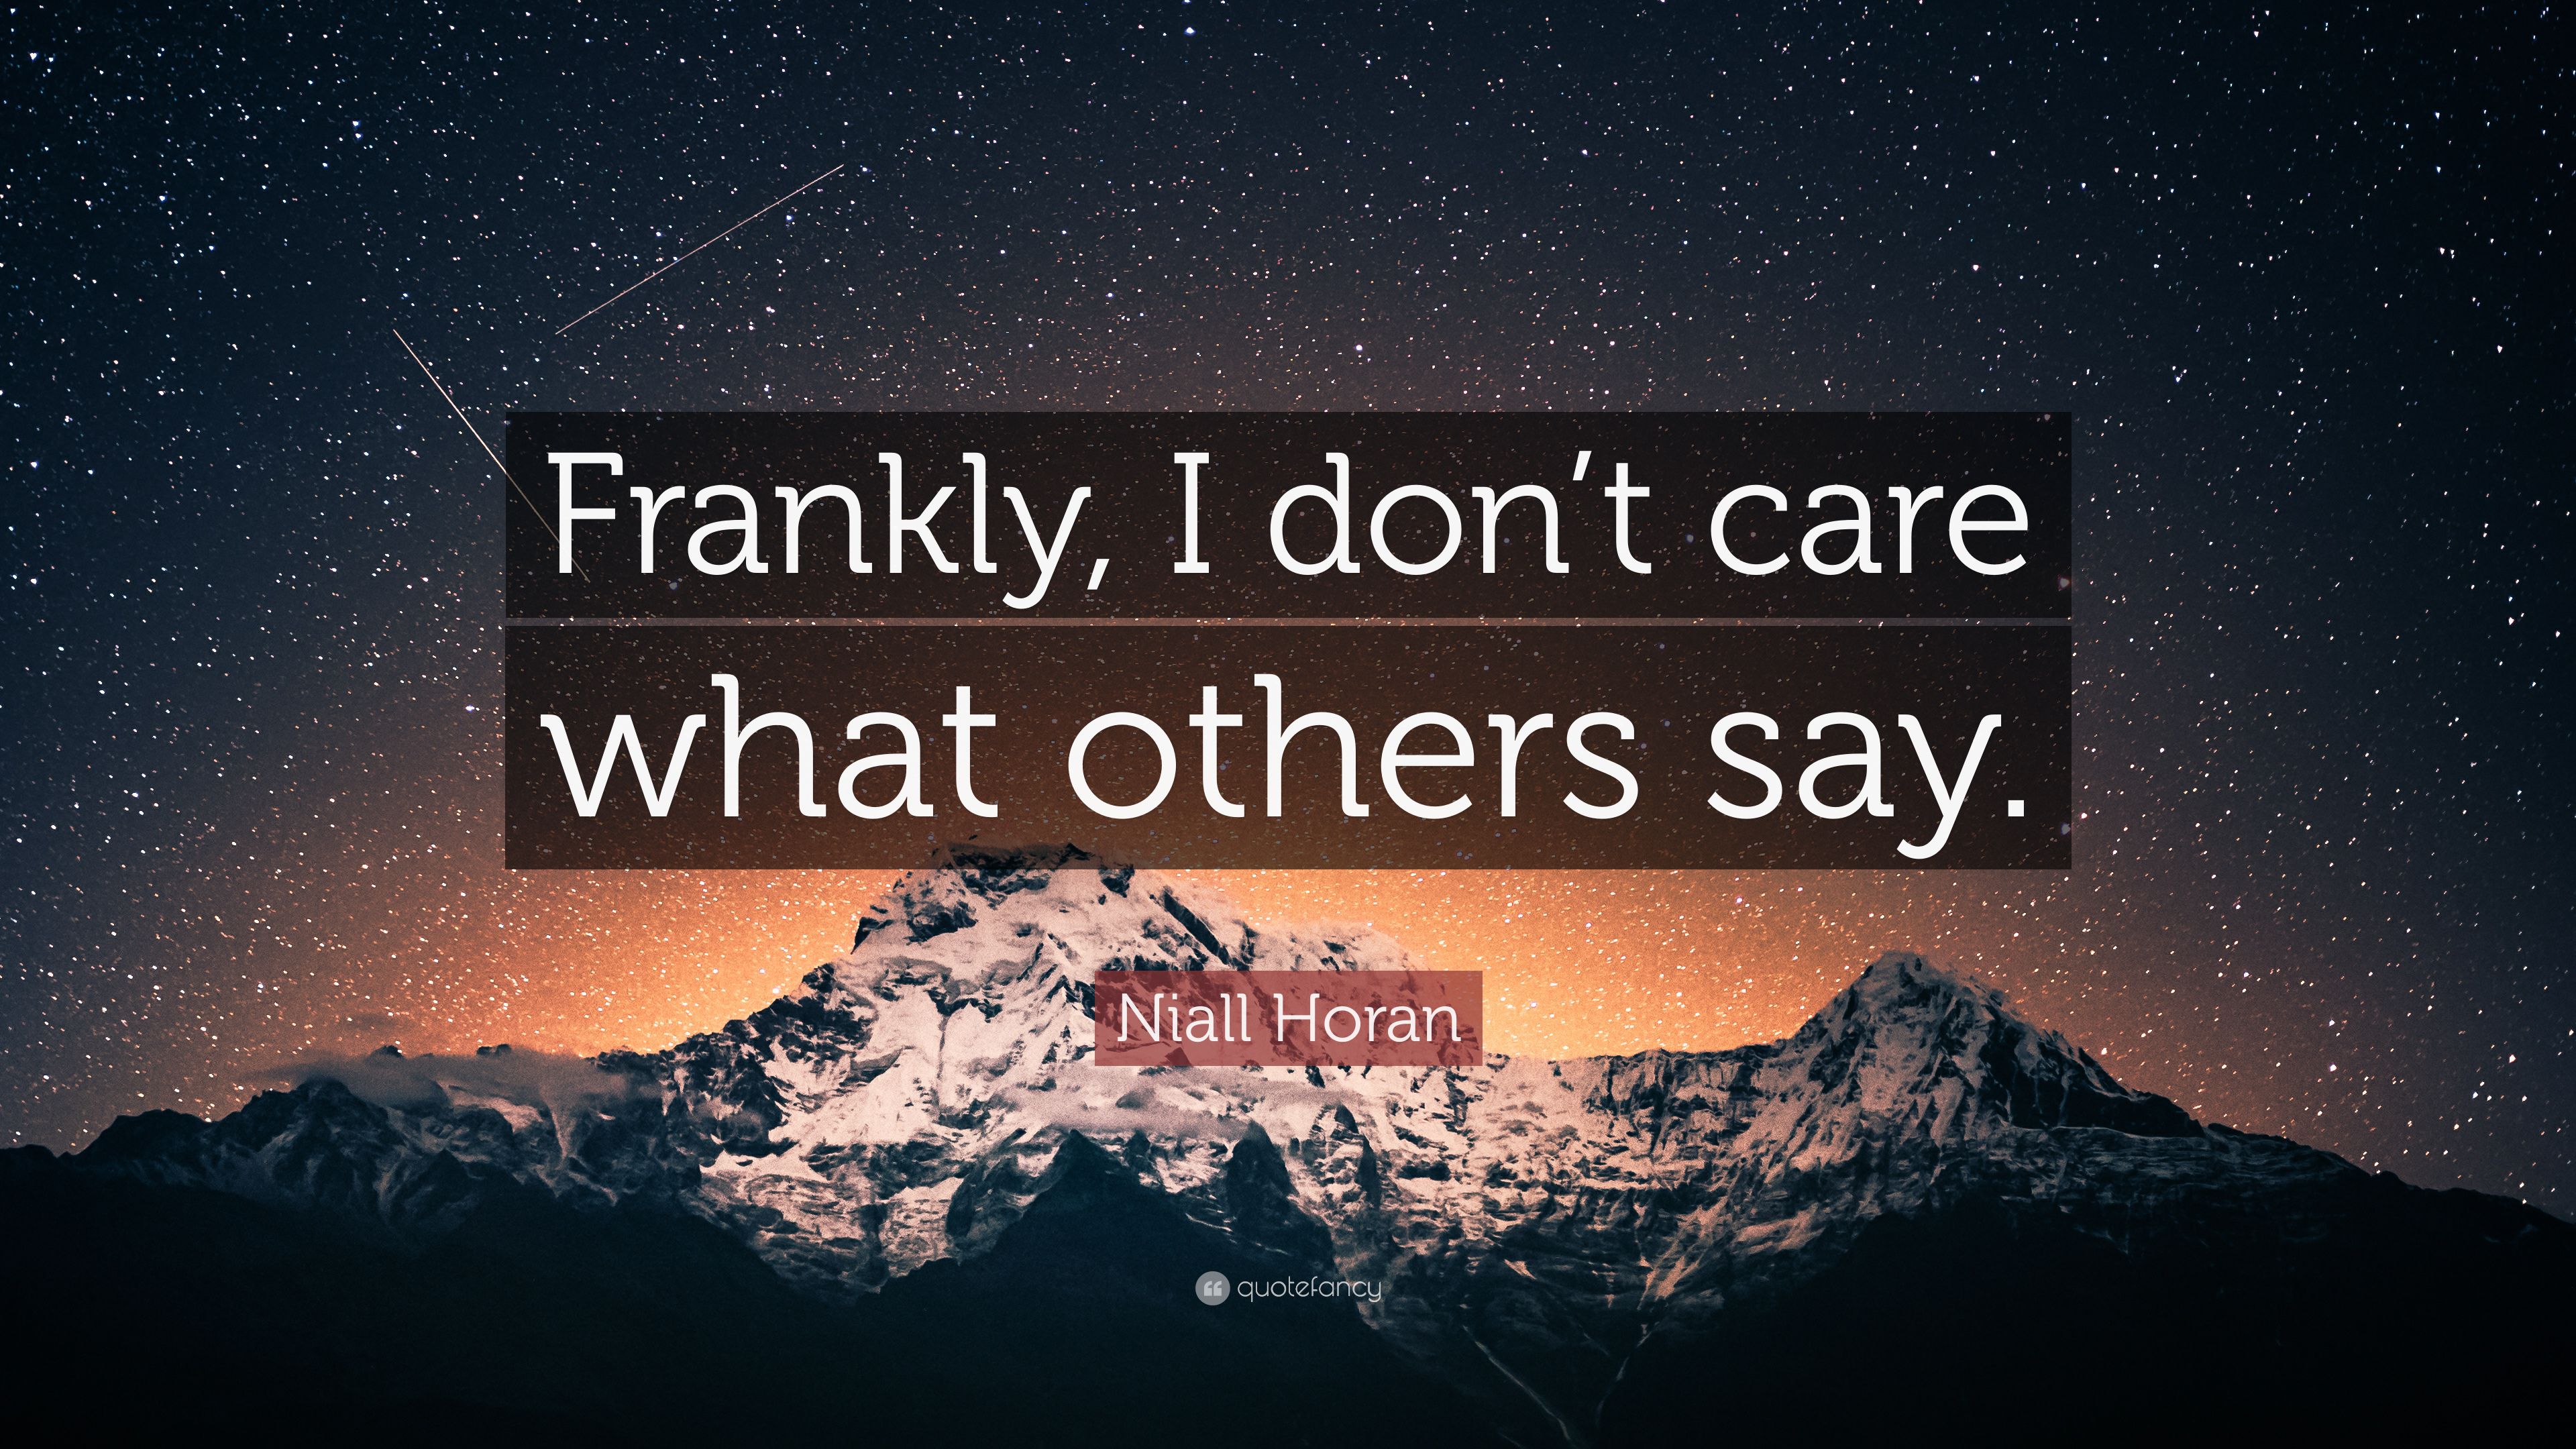 Niall Horan Quote: “Frankly, I don't care what others say.” 10